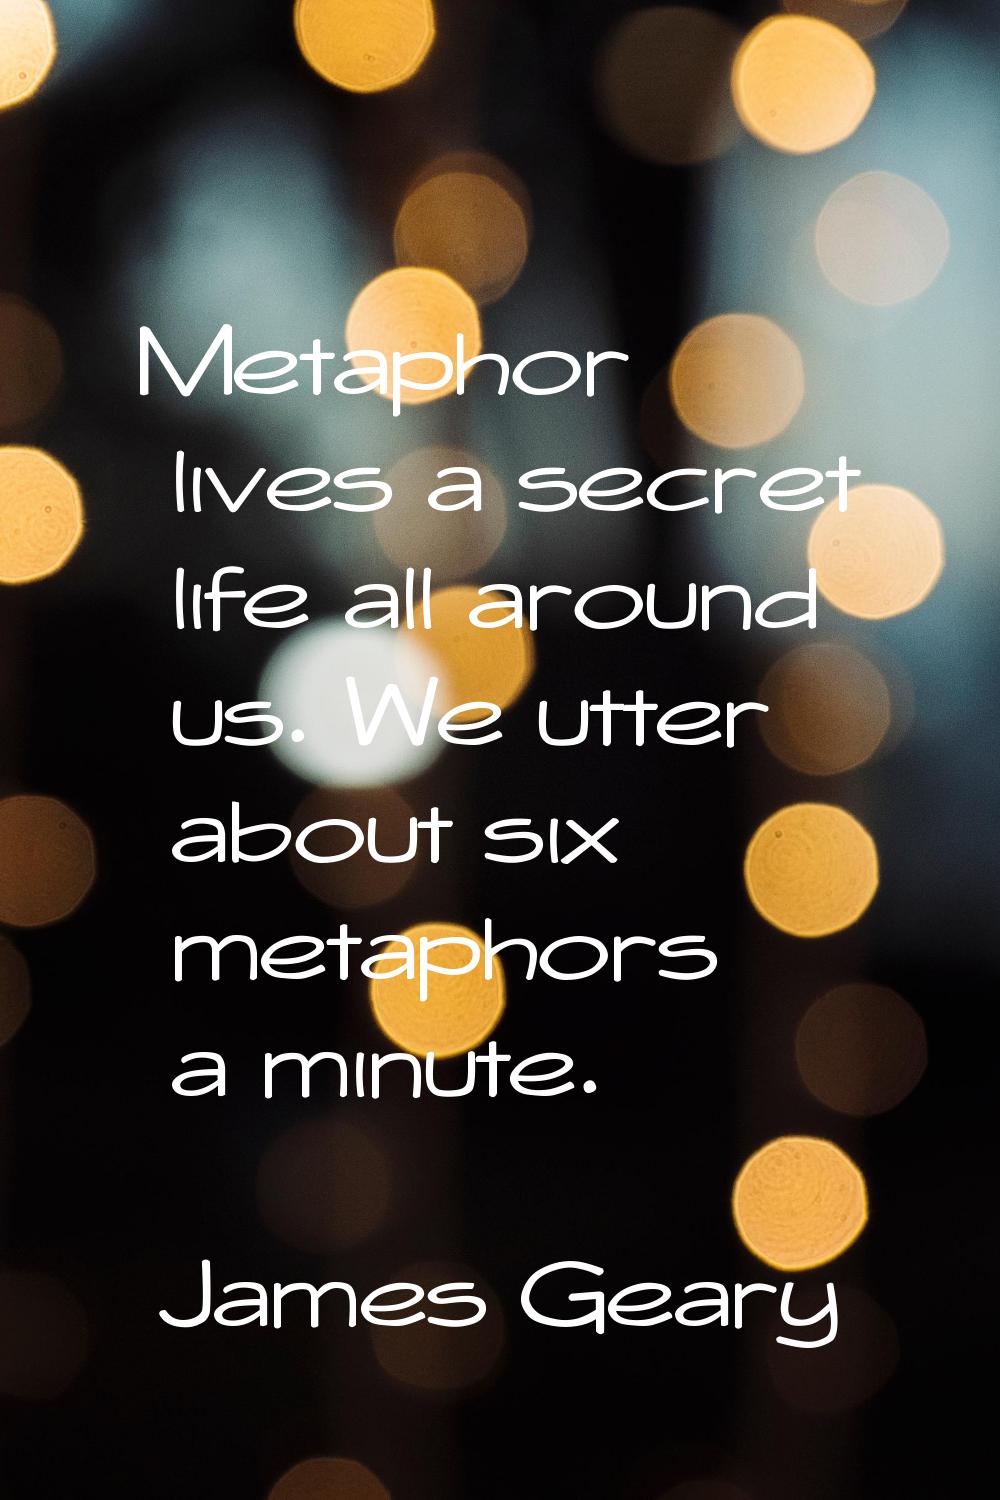 Metaphor lives a secret life all around us. We utter about six metaphors a minute.